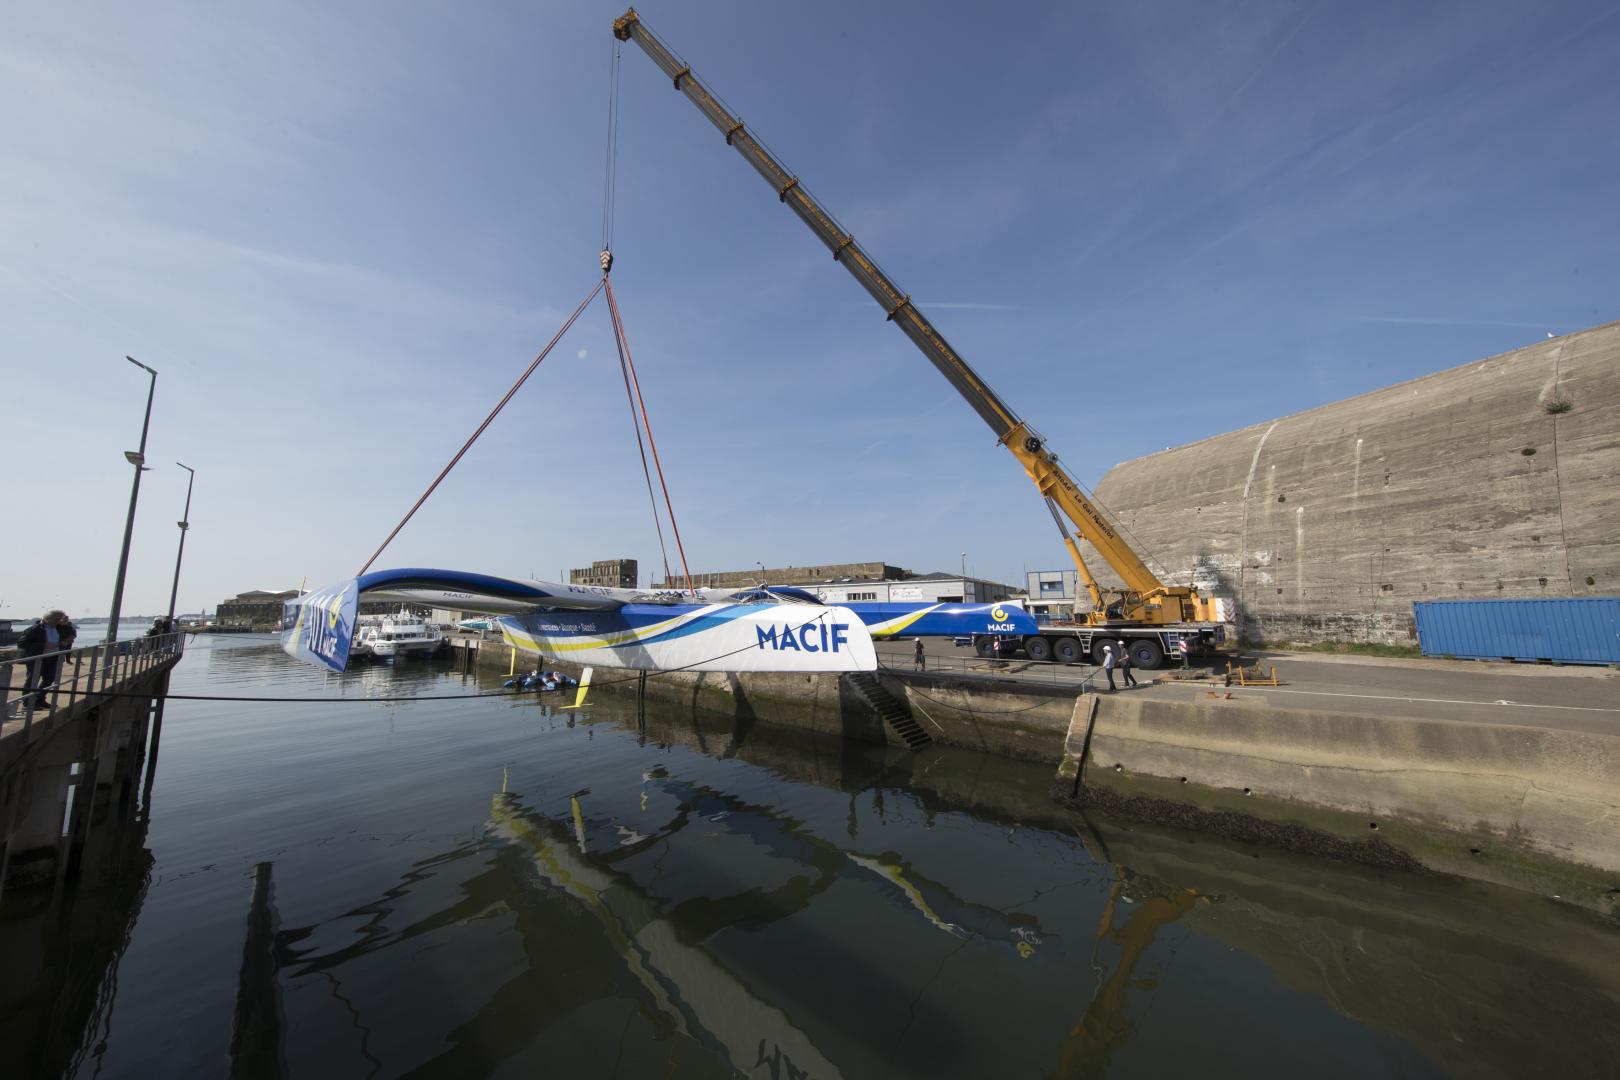 MACIF Trimaran back at sea, better performance and more reliable